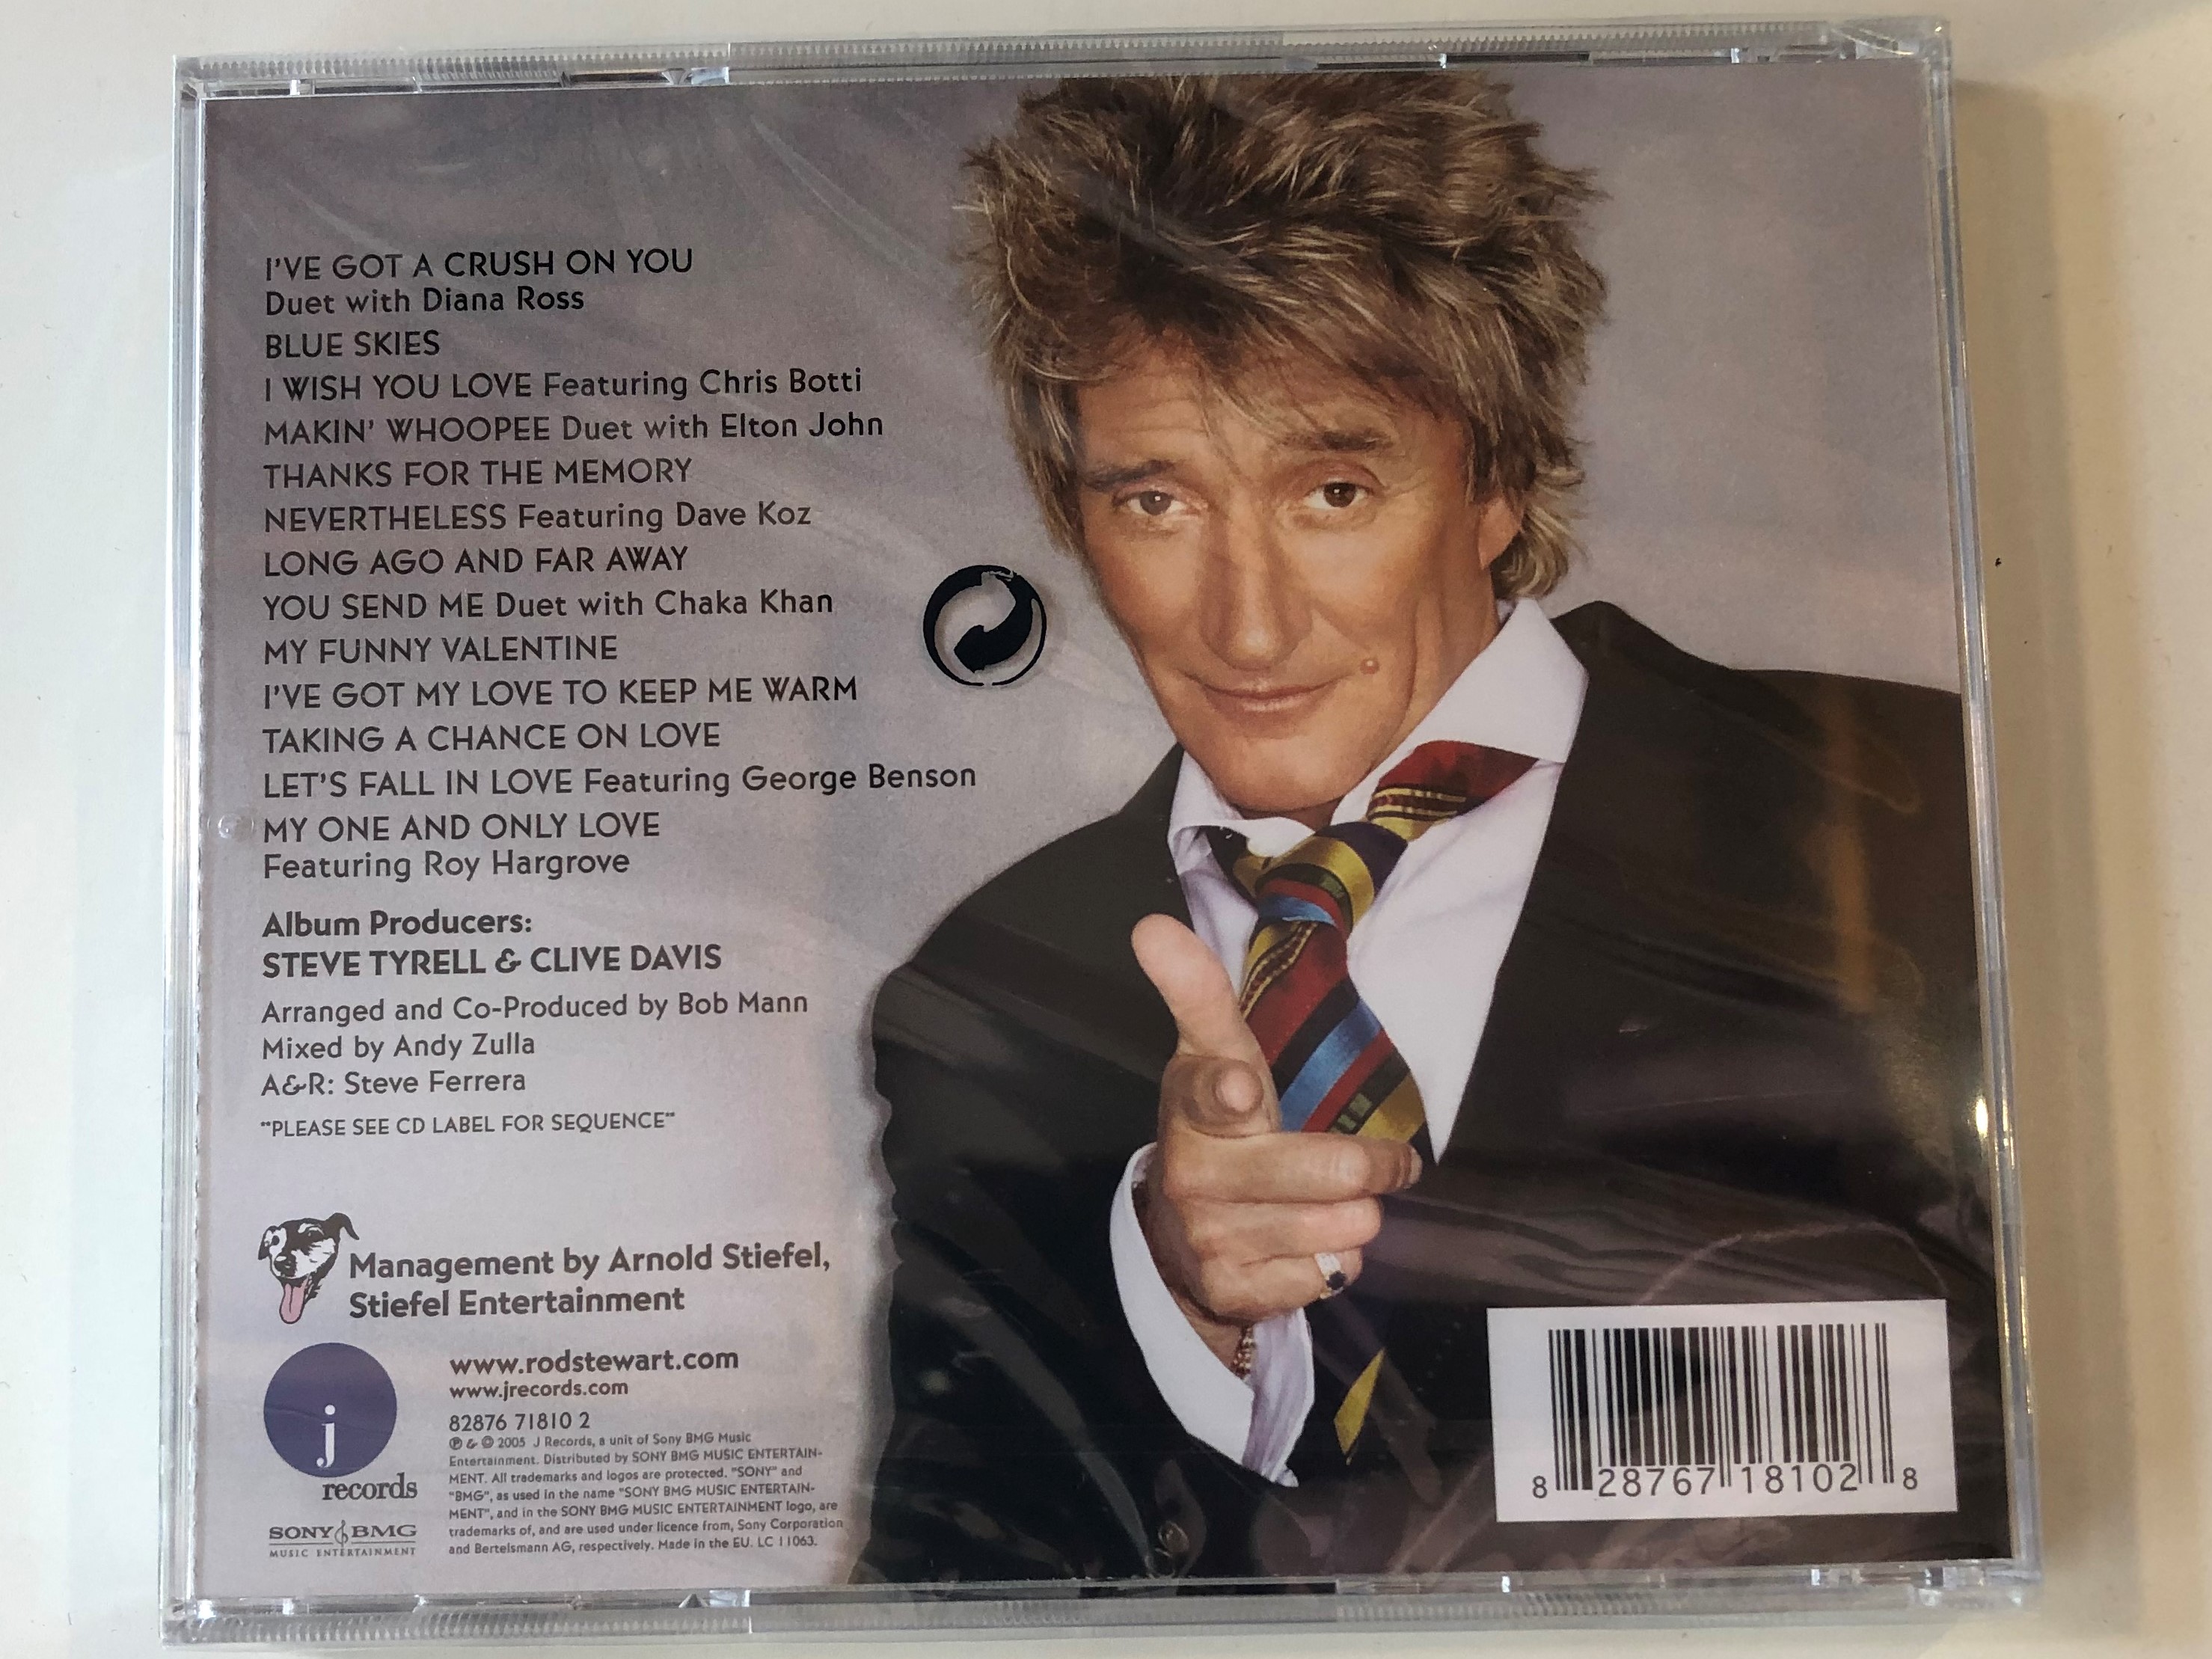 rod-stewart-thanks-for-the-memory...-the-great-american-songbook-volume-iv-j-records-audio-cd-2005-82876-71810-2-2-.jpg